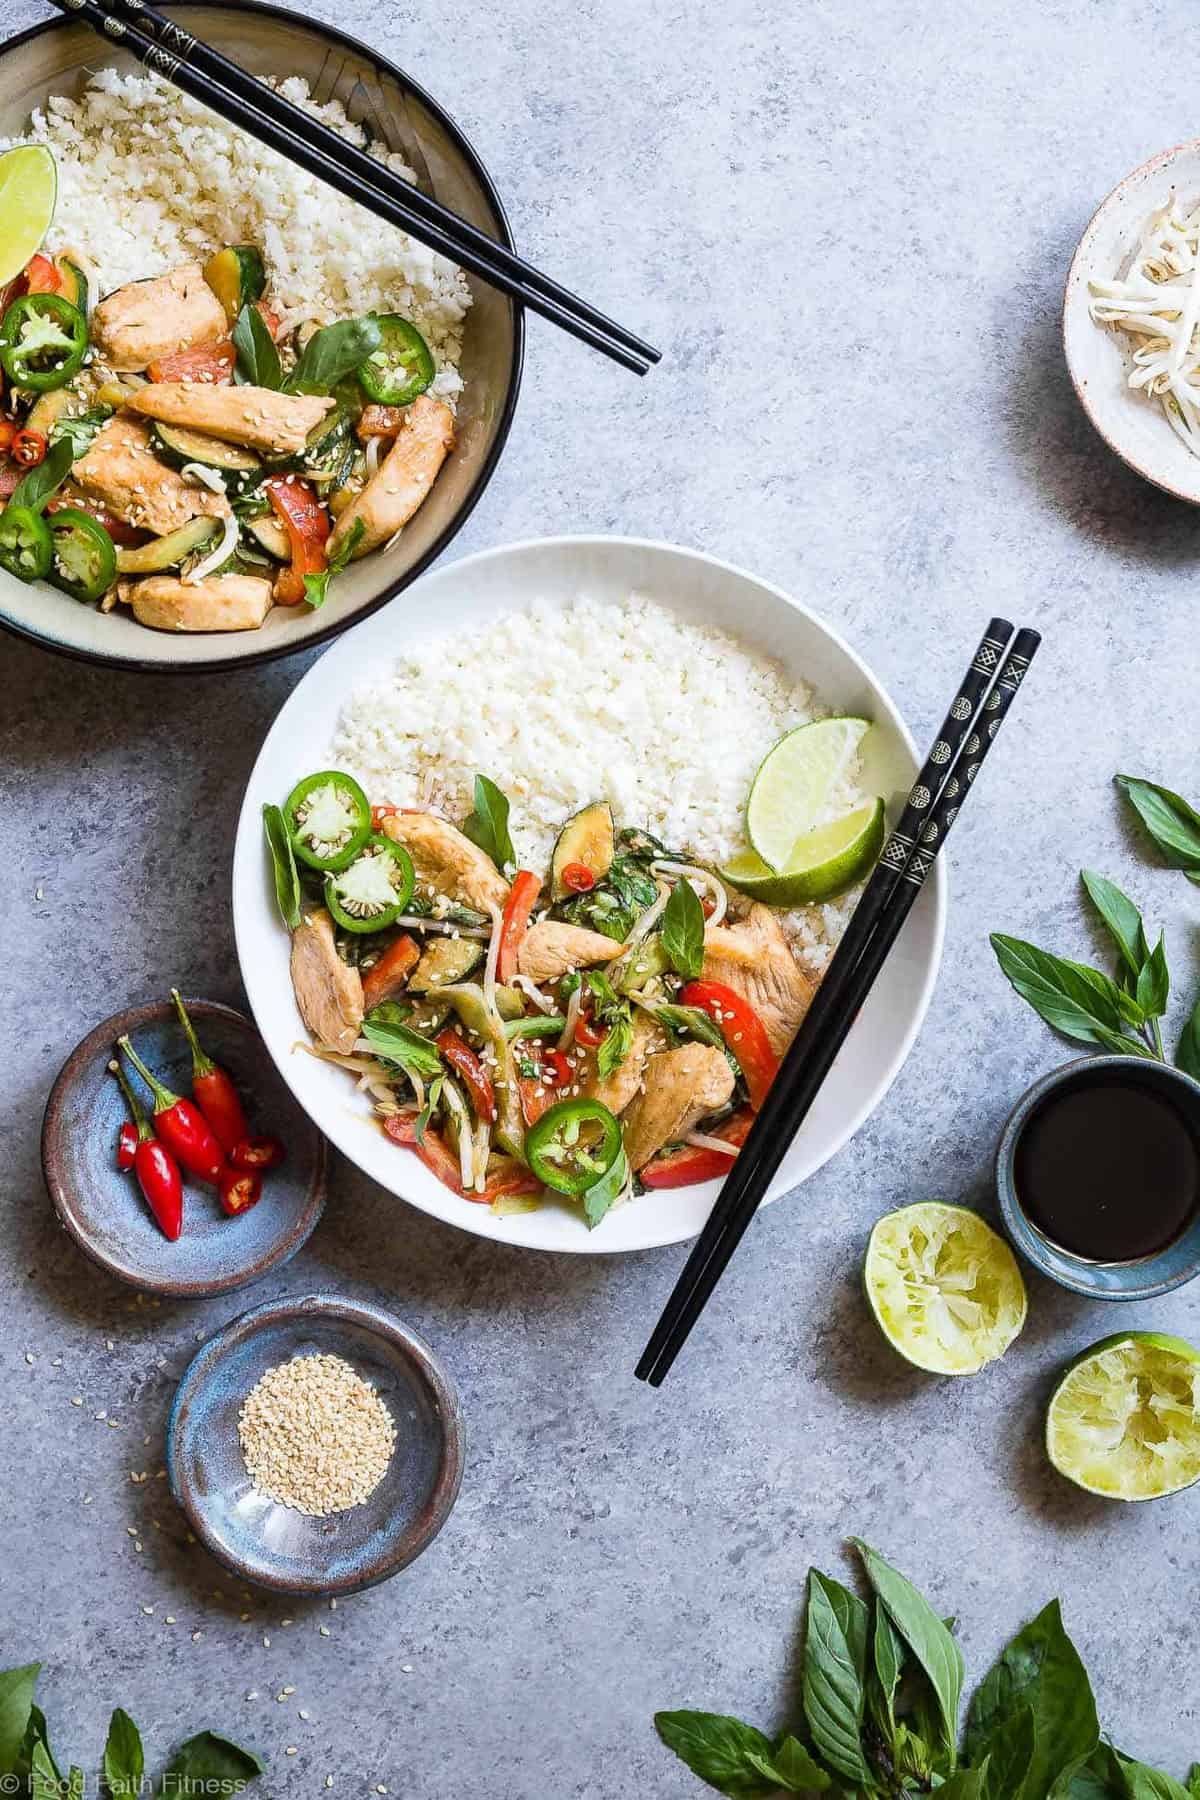 Spicy Thai Basil Chicken Stir Fry - A 20 minute, healthy, gluten free dinner that is paleo friendly, lower carb and only 300 calories! It will be your new go to weeknight meal! | #Foodfaithfitness | #Glutenfree #Paleo #Lowcarb #Healthy #DairyFree